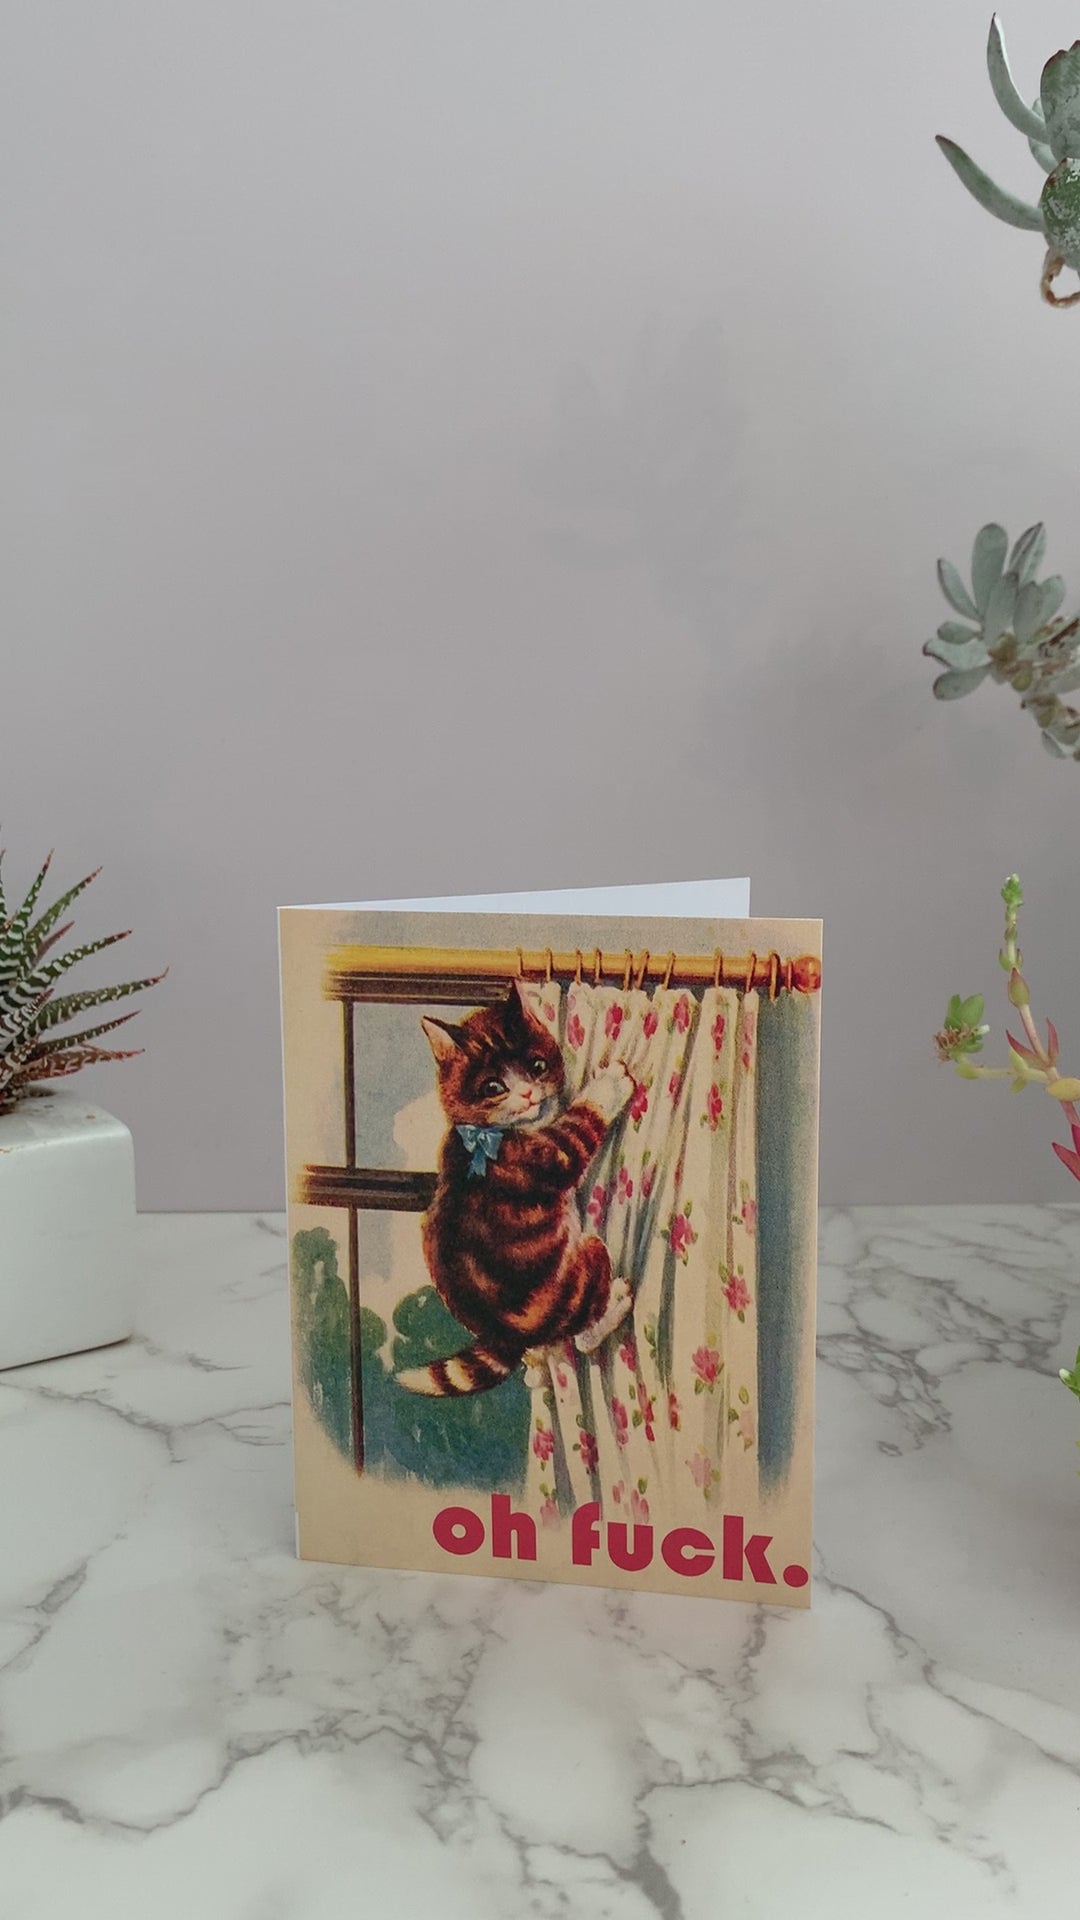 Greeting card with a vintage image of a brown and orange stripped kitty that has climbed up floral drapes covering a window. Greeting says, "Oh fuck." Color pallet is vintage yellows, cream, blues, and pinks. Blank inside. 